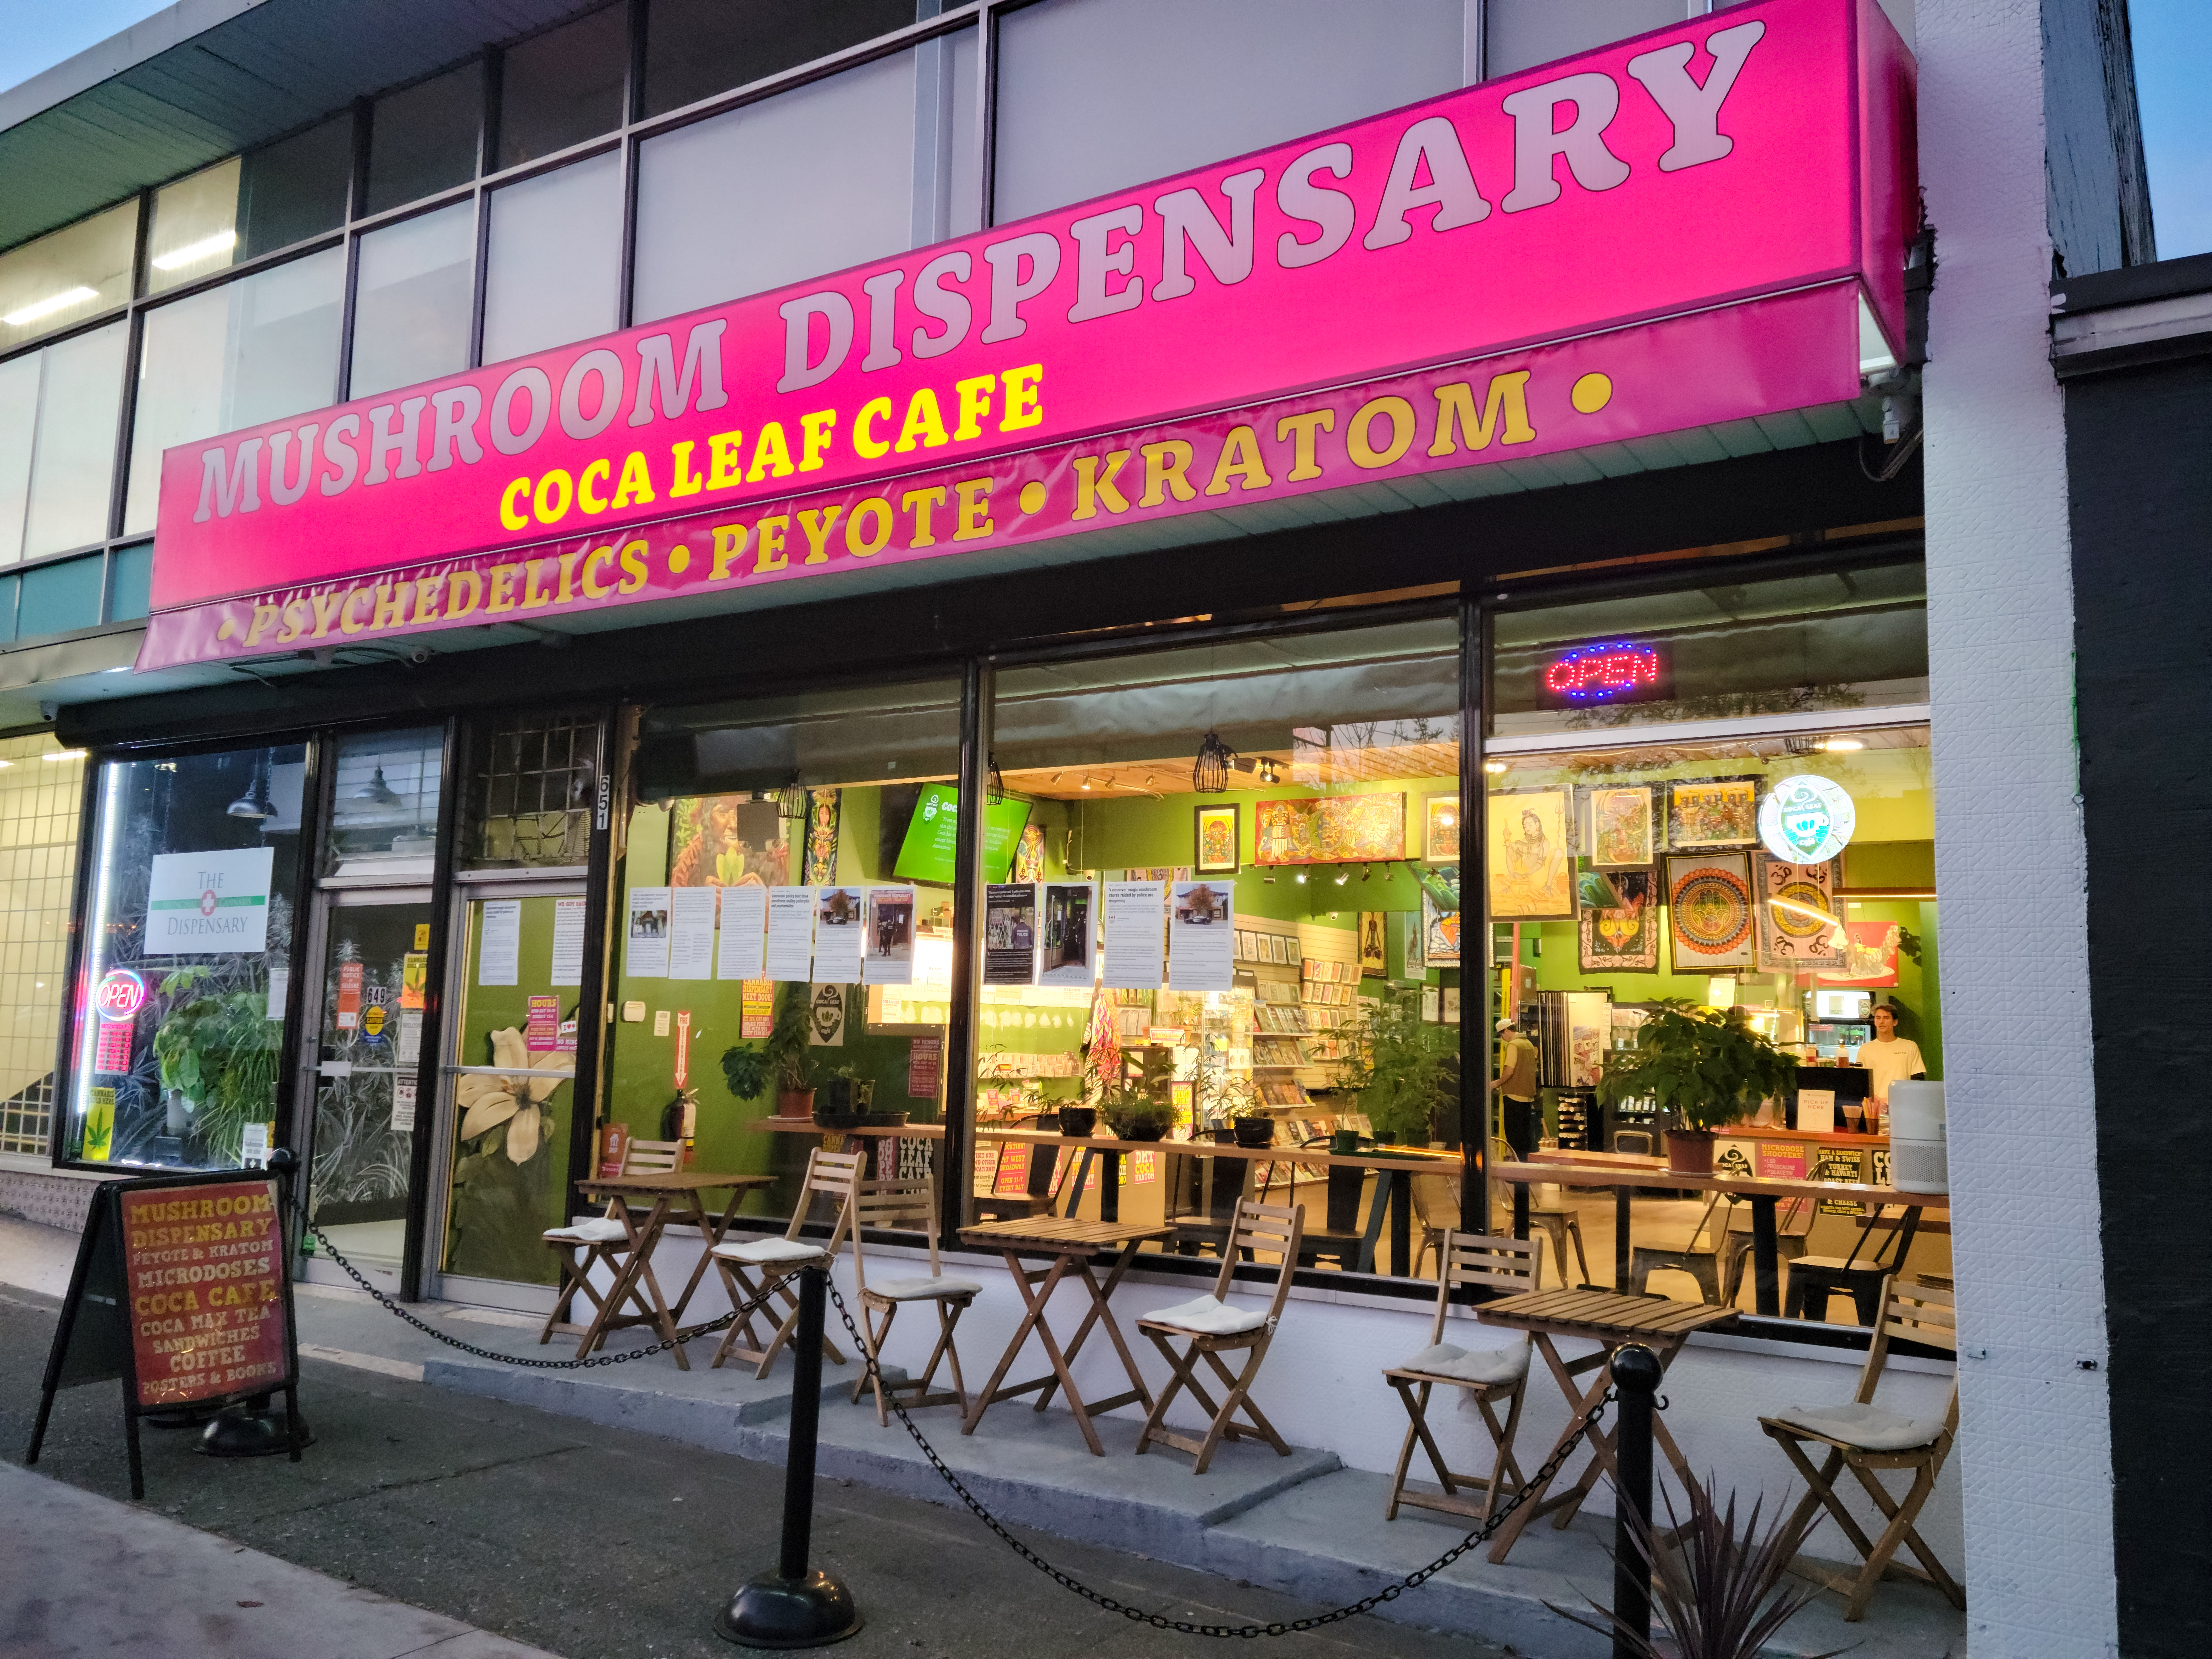 This is a photo of the outside of Dana Larsen’s mushroom dispensary. The bright pink and orange sign on the storefront reads “Mushroom Dispensary, Coca Leaf Cafe.”